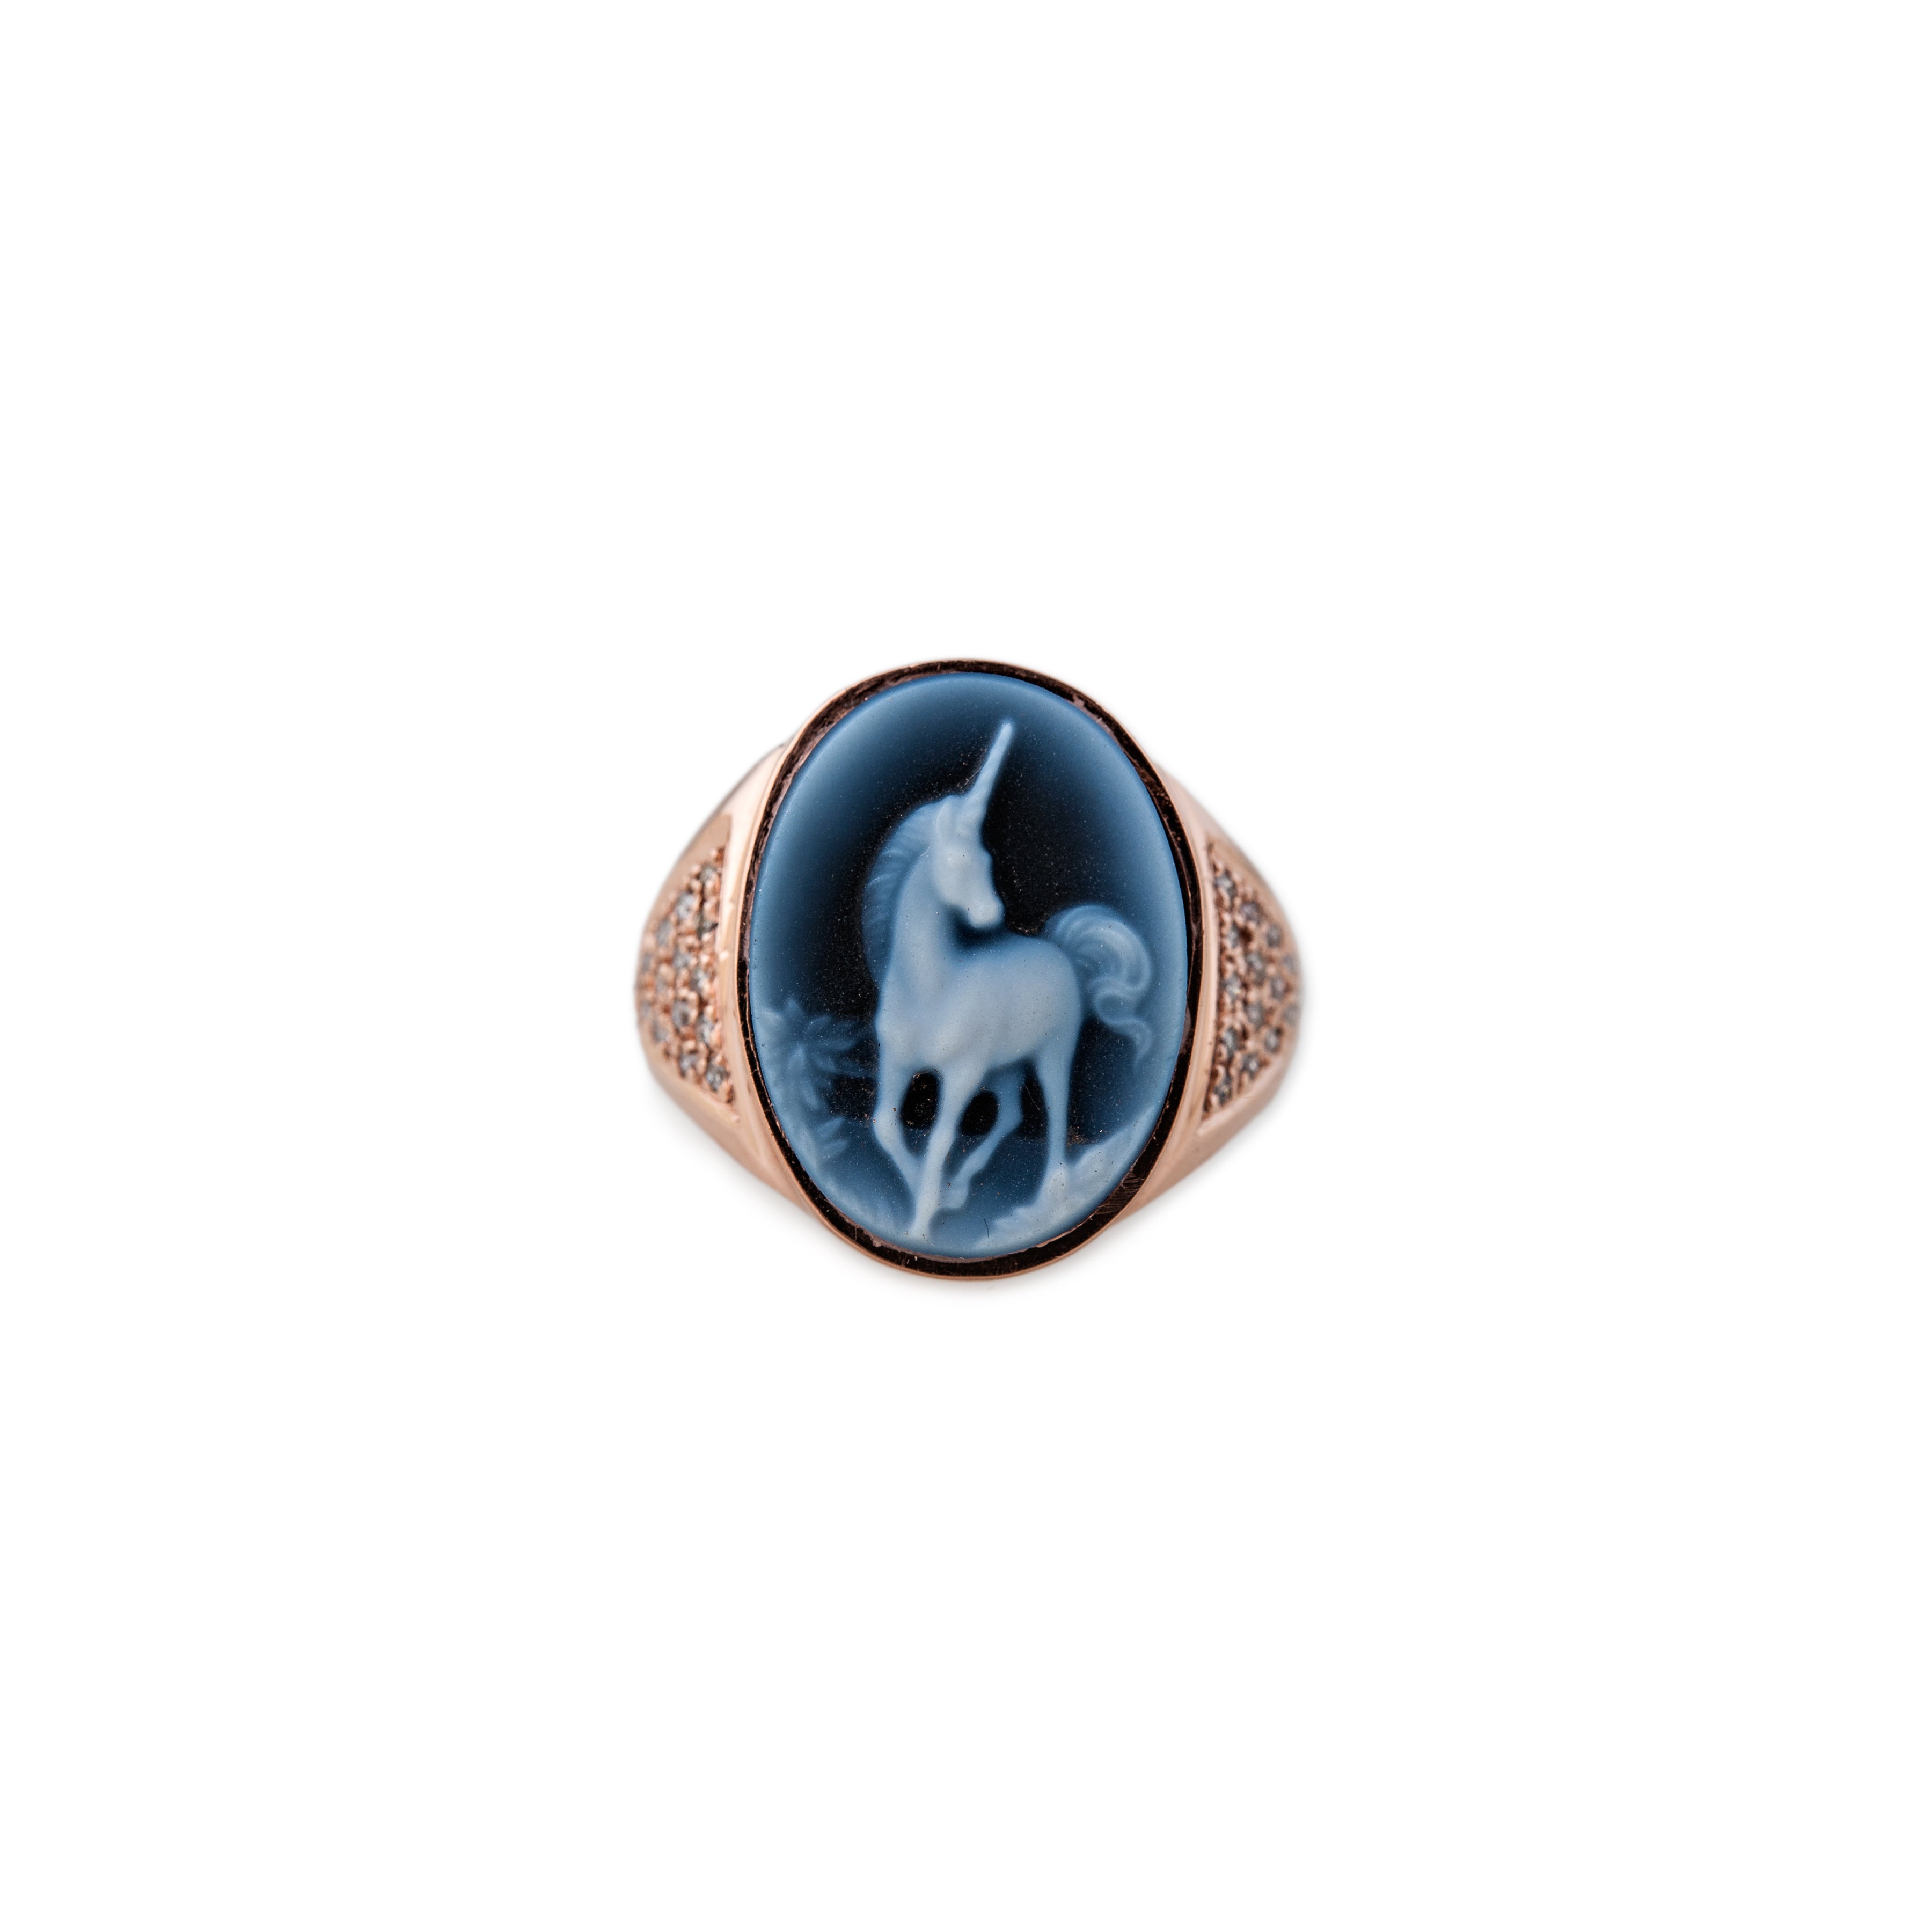 CARVED AGATE UNICORN CAMEO RING